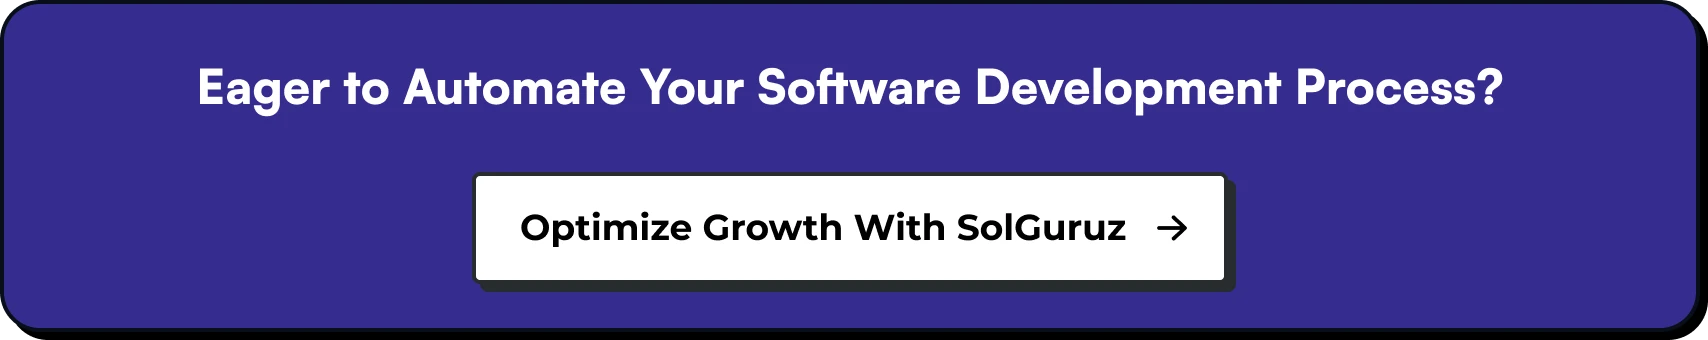 Eager to Automate Your Software Development Process? Optimize Growth with SolGuruz